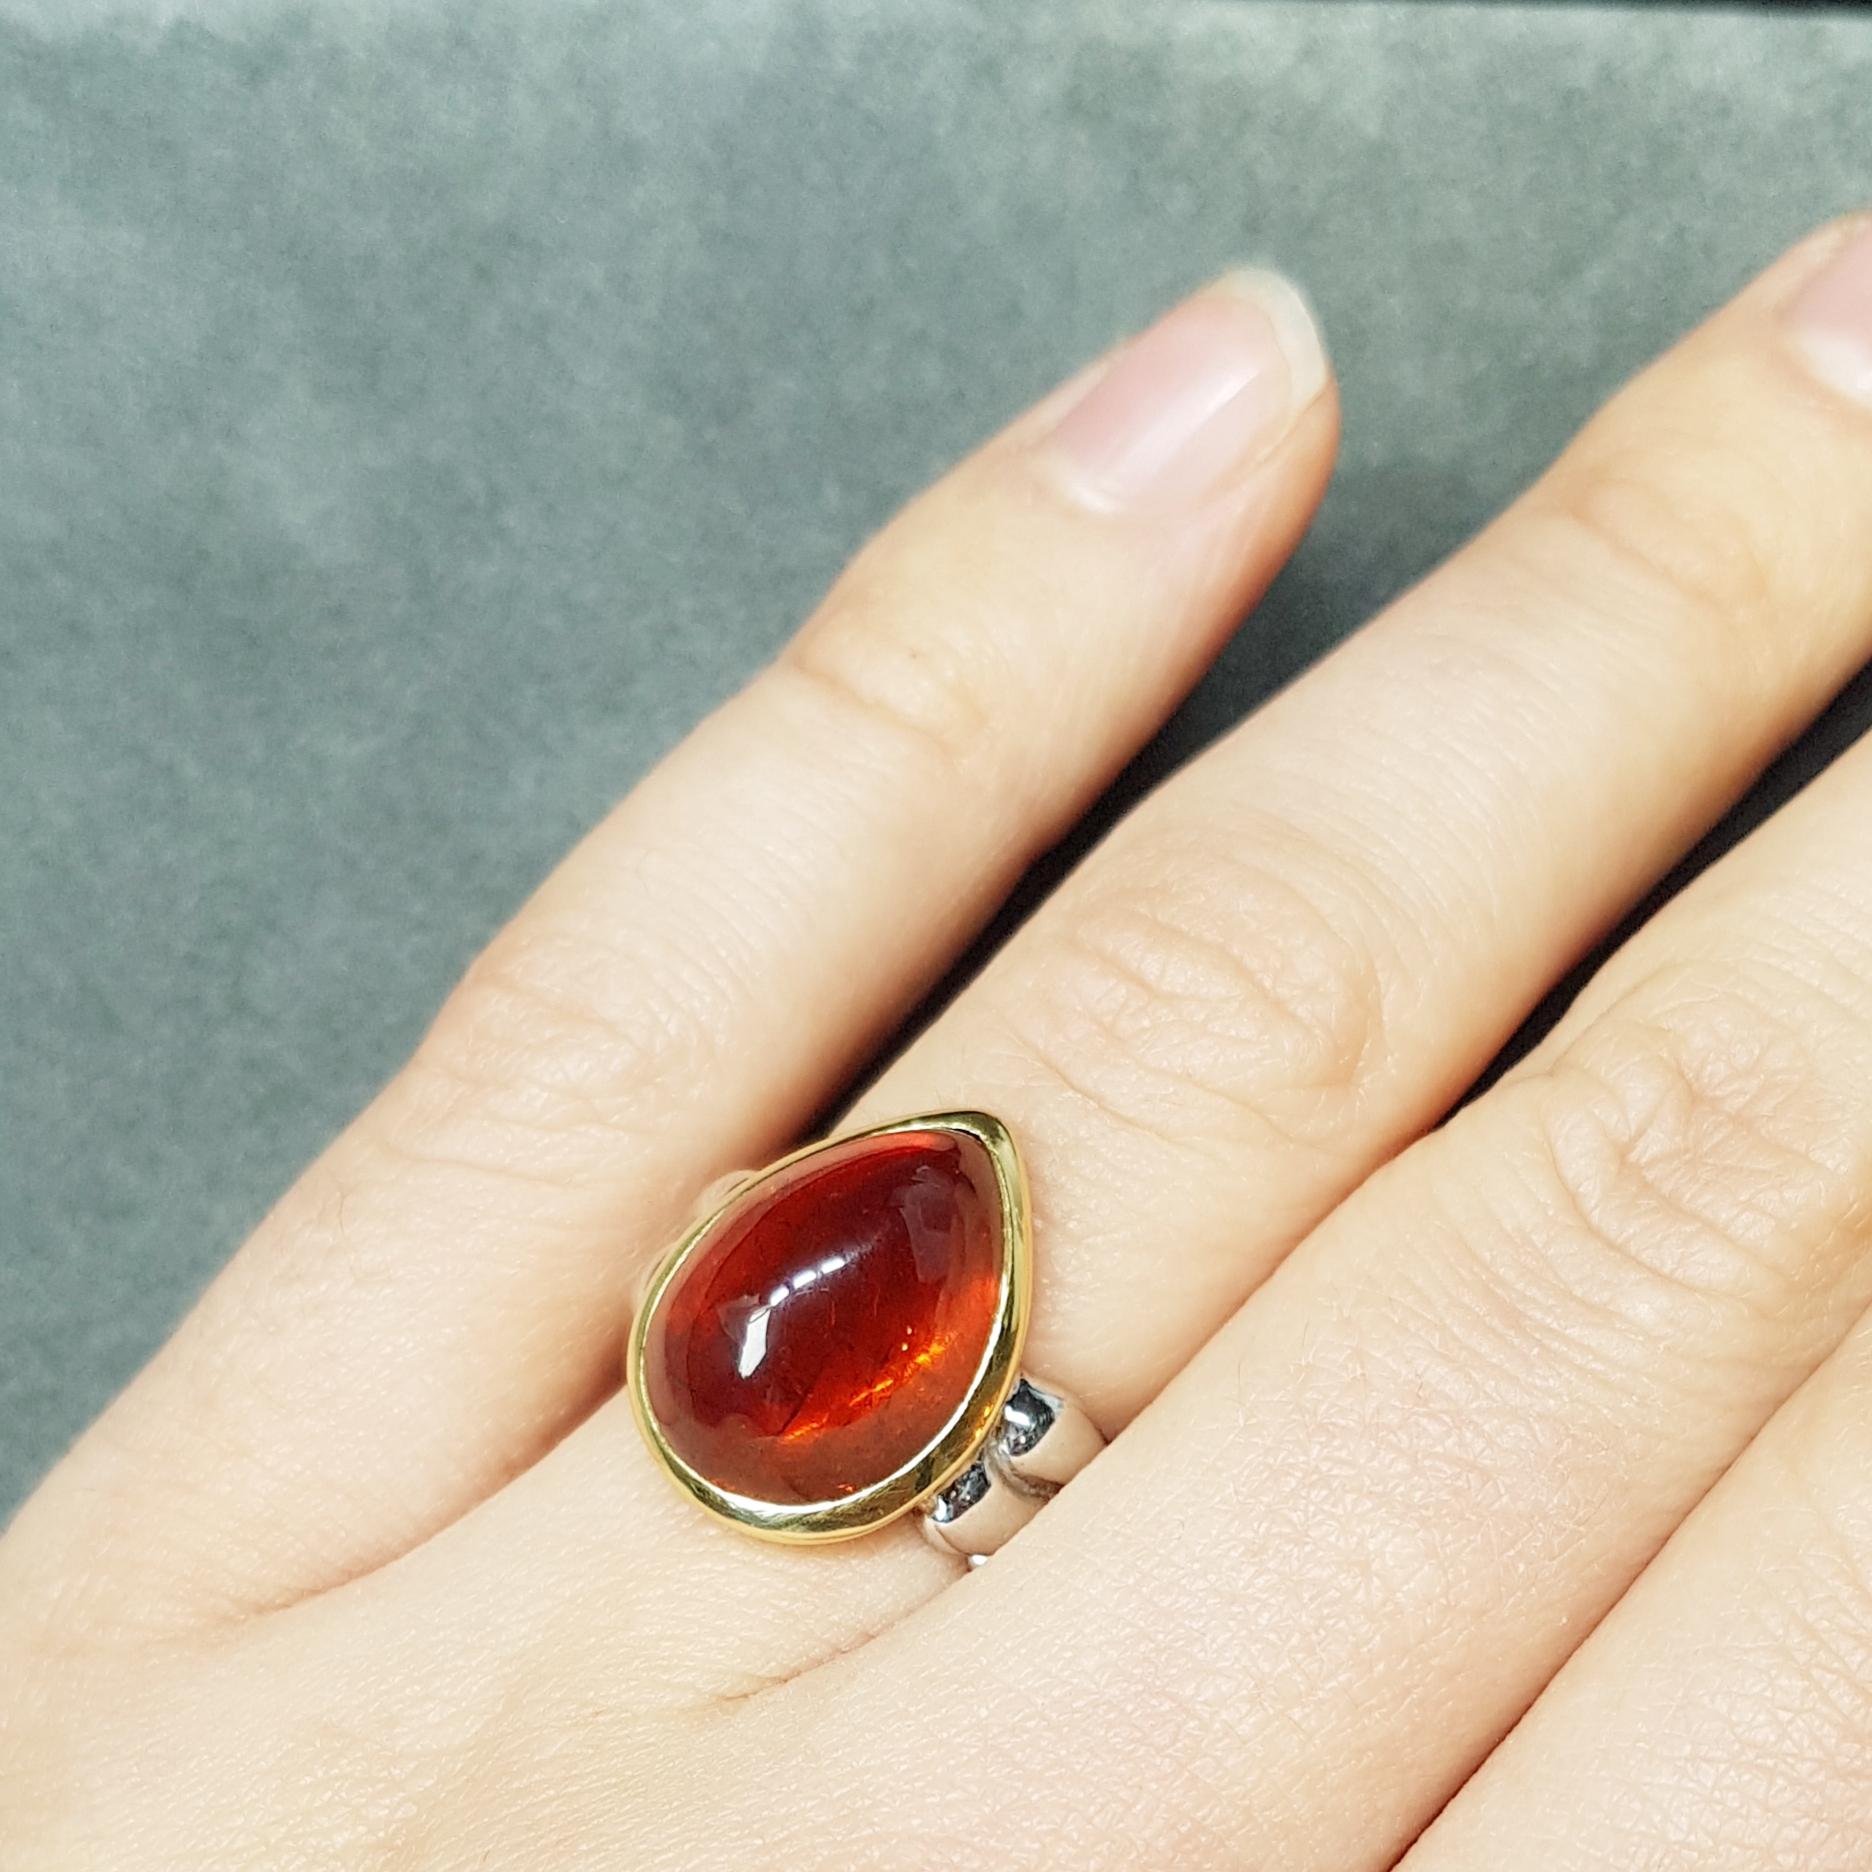 Pear Cut 28.87ct Cabochon Spessartite Garnet Dress Ring 18k White & Yellow Gold  For Sale